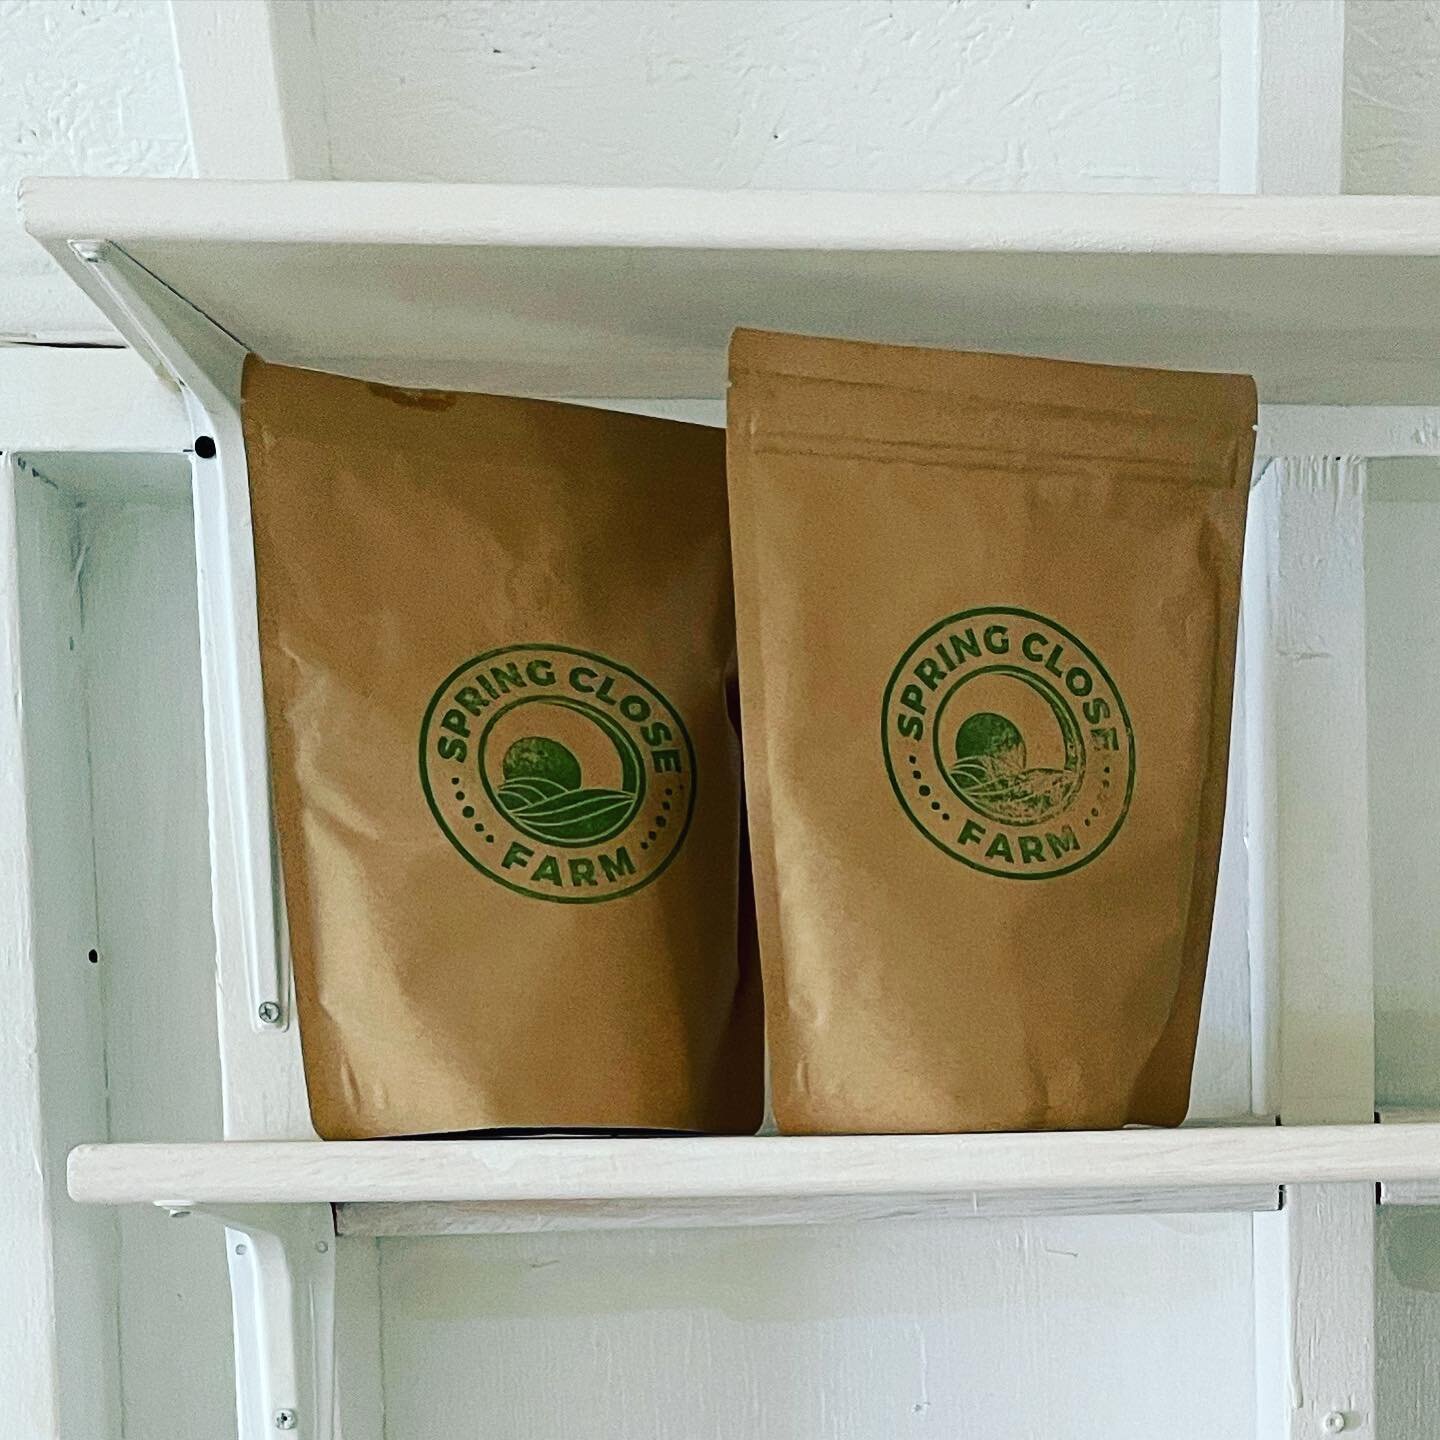 Custom ☕️ blend looks good on our fresh white shelves 🤗 can&rsquo;t wait to finish stocking the store! #coffee #farmstand #comingsoon #onestop #springclosefarm